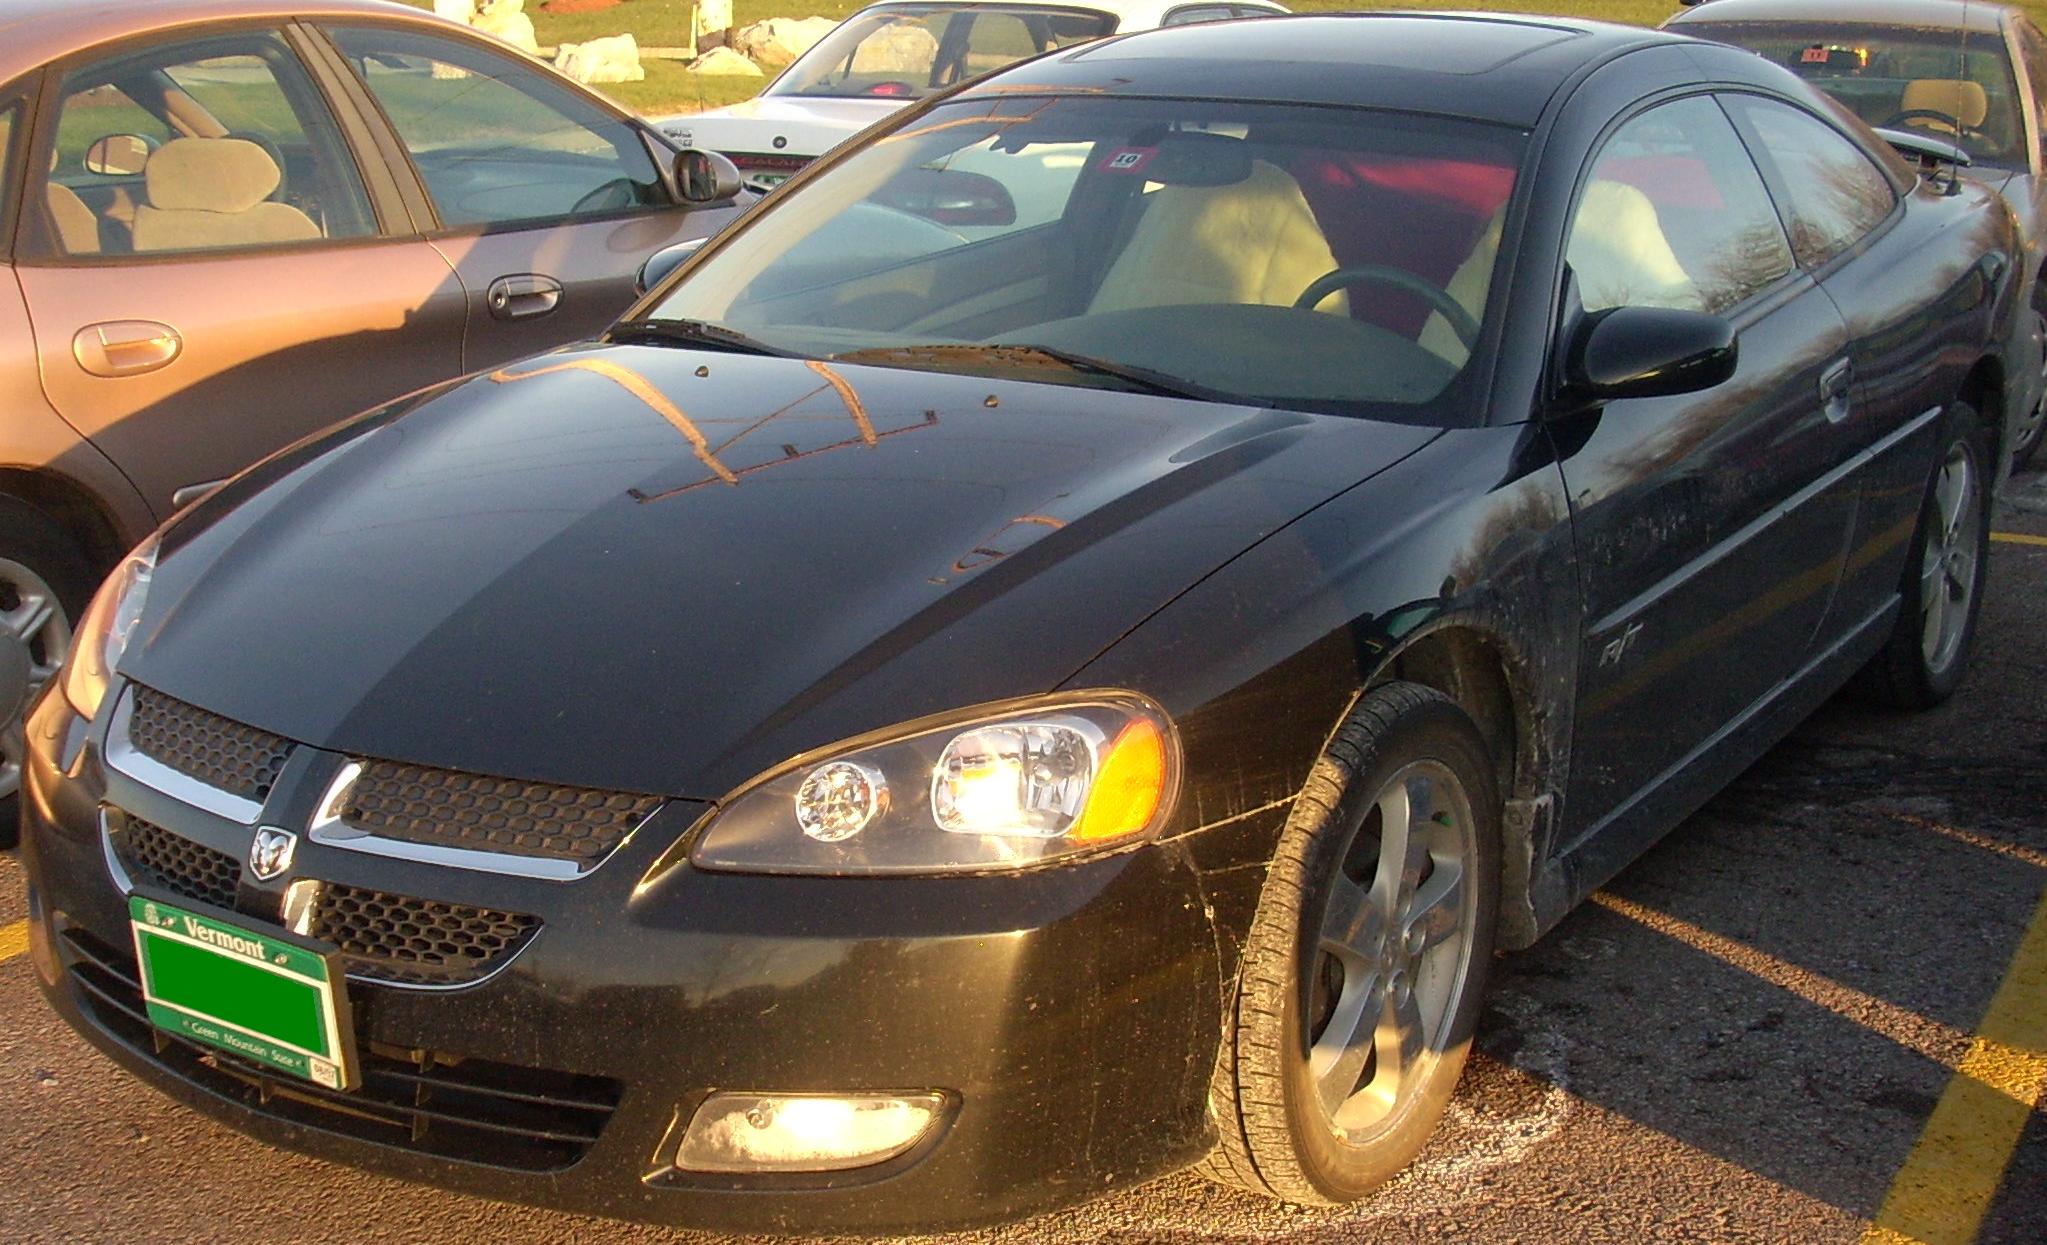 File:'04-'05 Dodge Stratus R-T Coupe.JPG - Wikimedia Commons